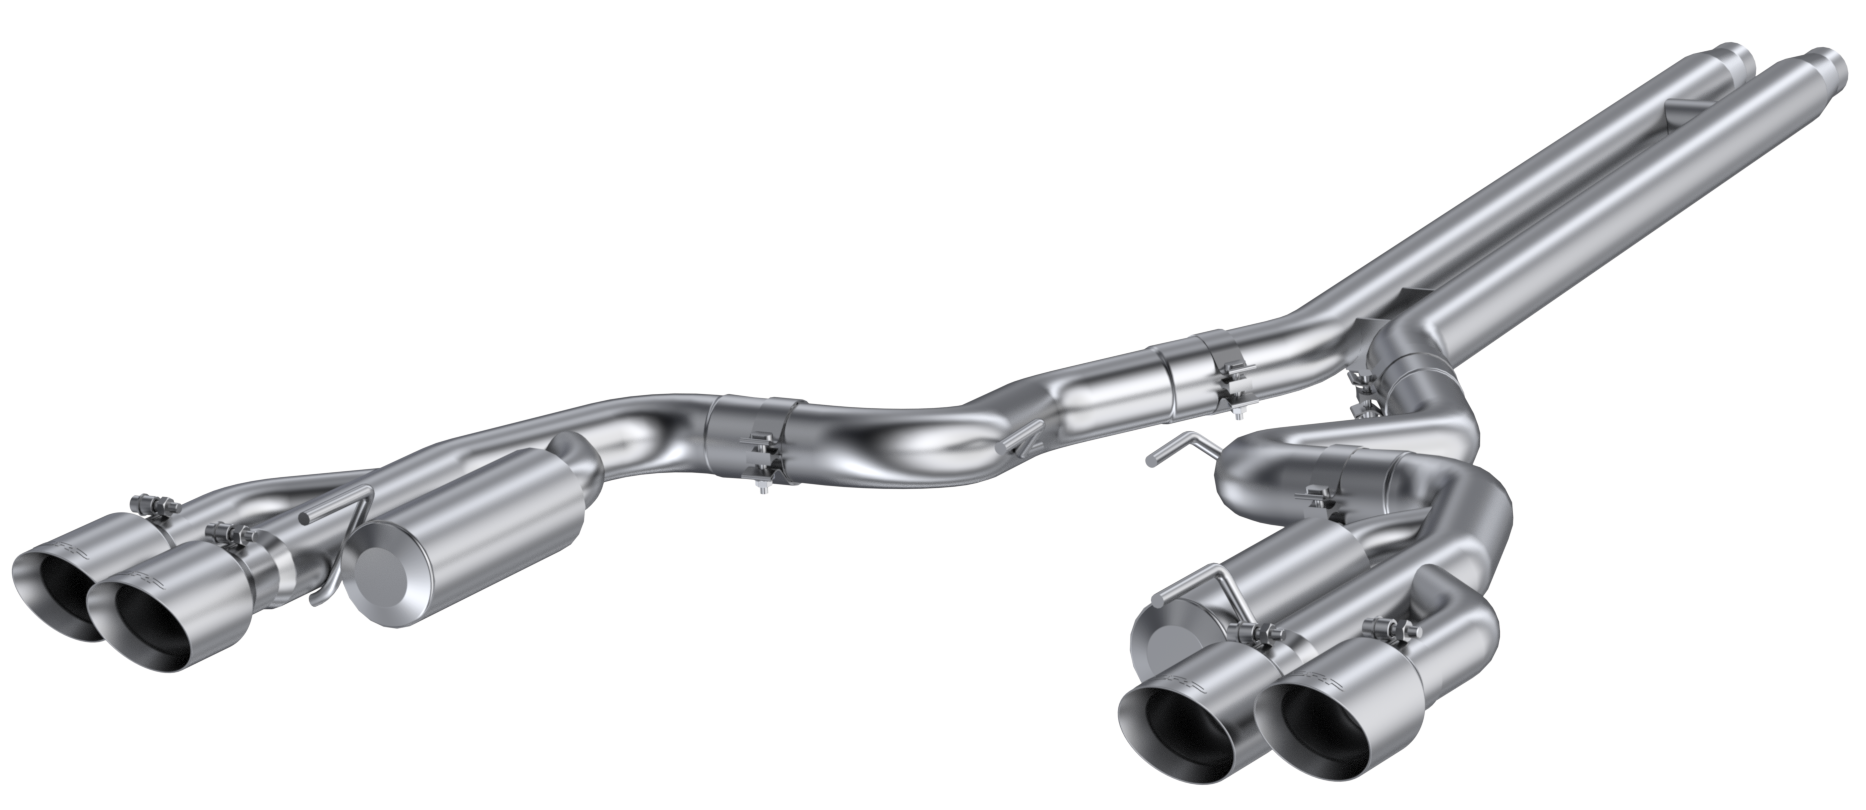 Image of Armor Pro exhaust